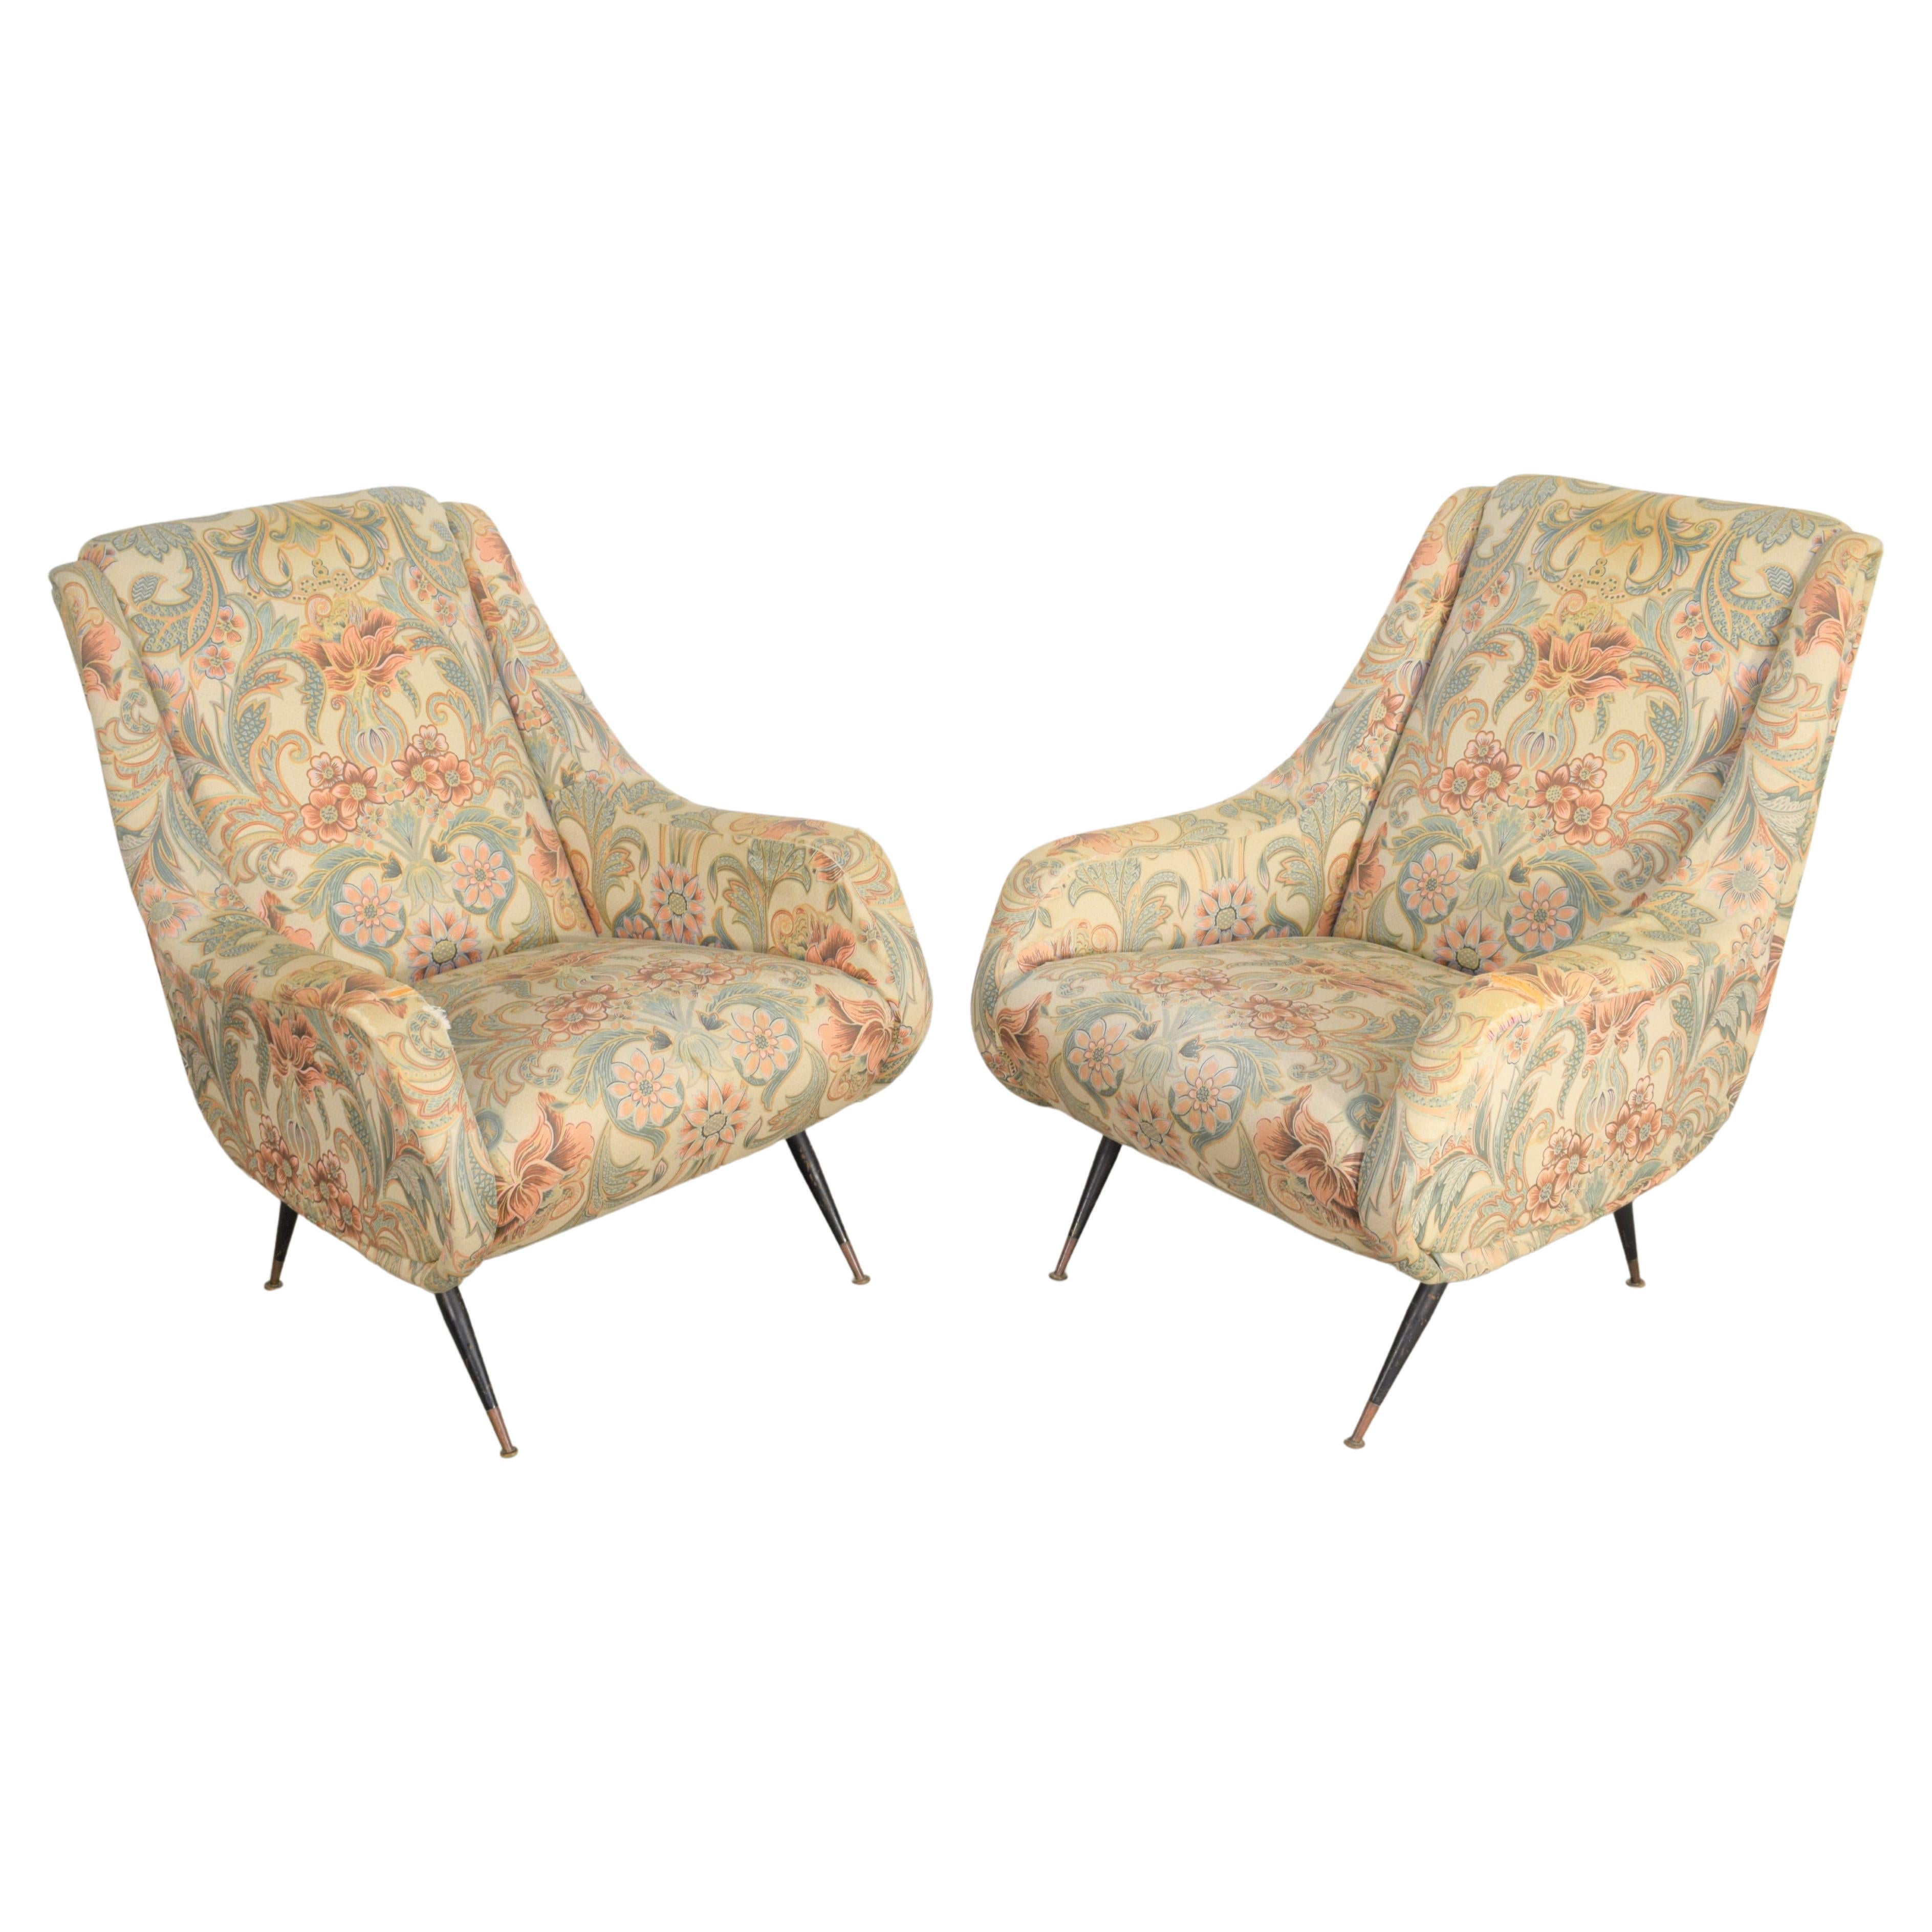 Pair of Italian Armchairs by Aldo Morbelli for Isa, 1950s For Sale